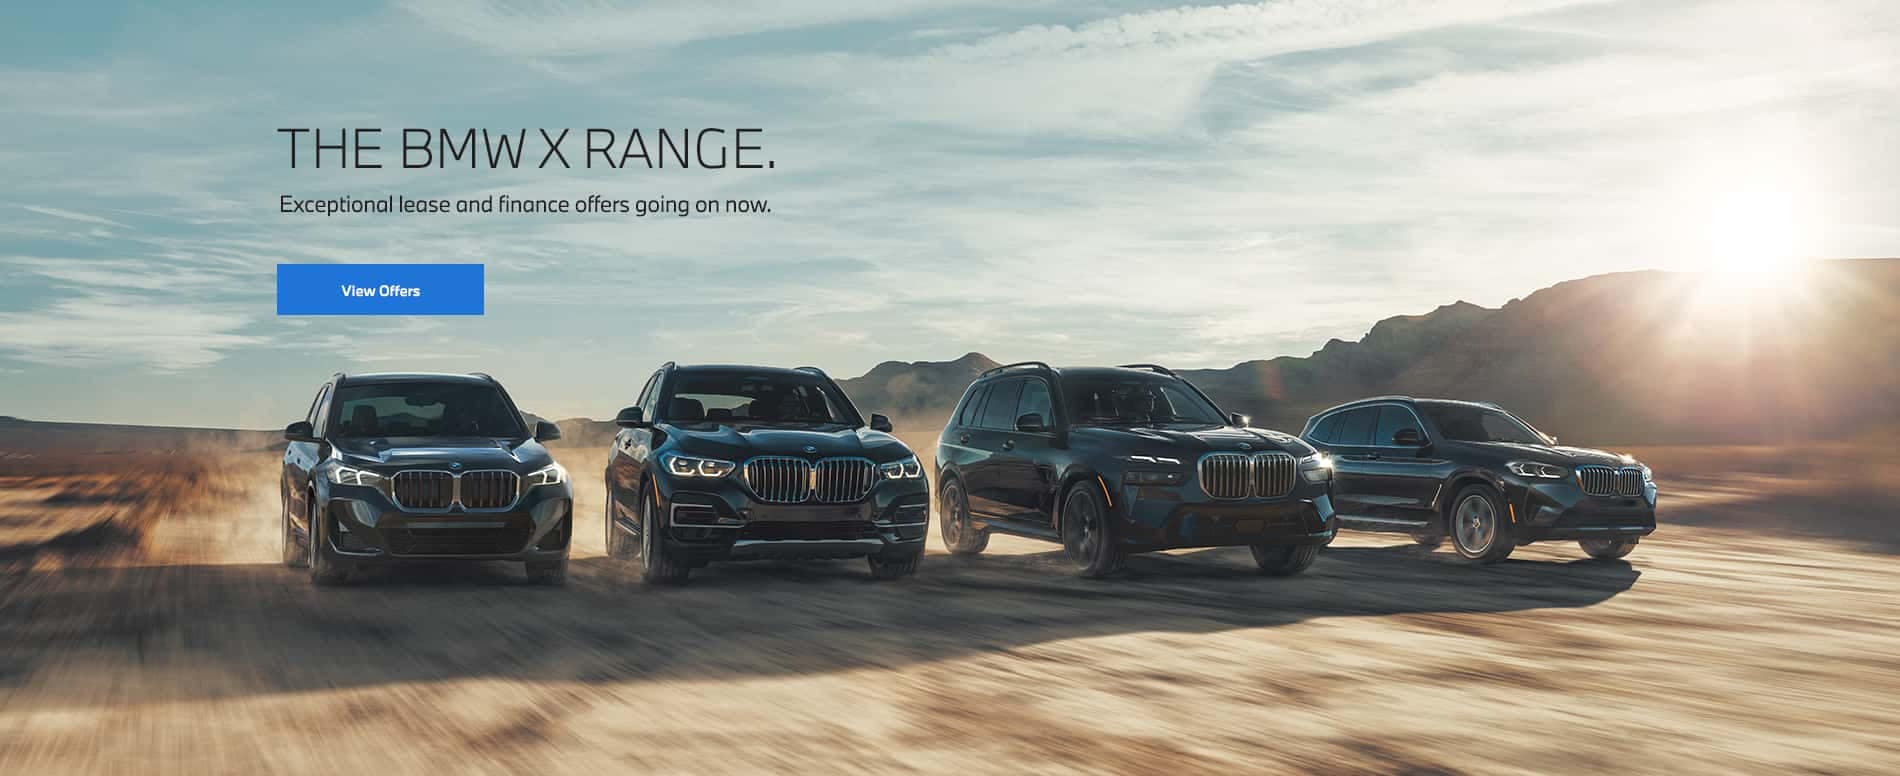 Exceptional Lease and Finance Offers on the BMW X-Range.